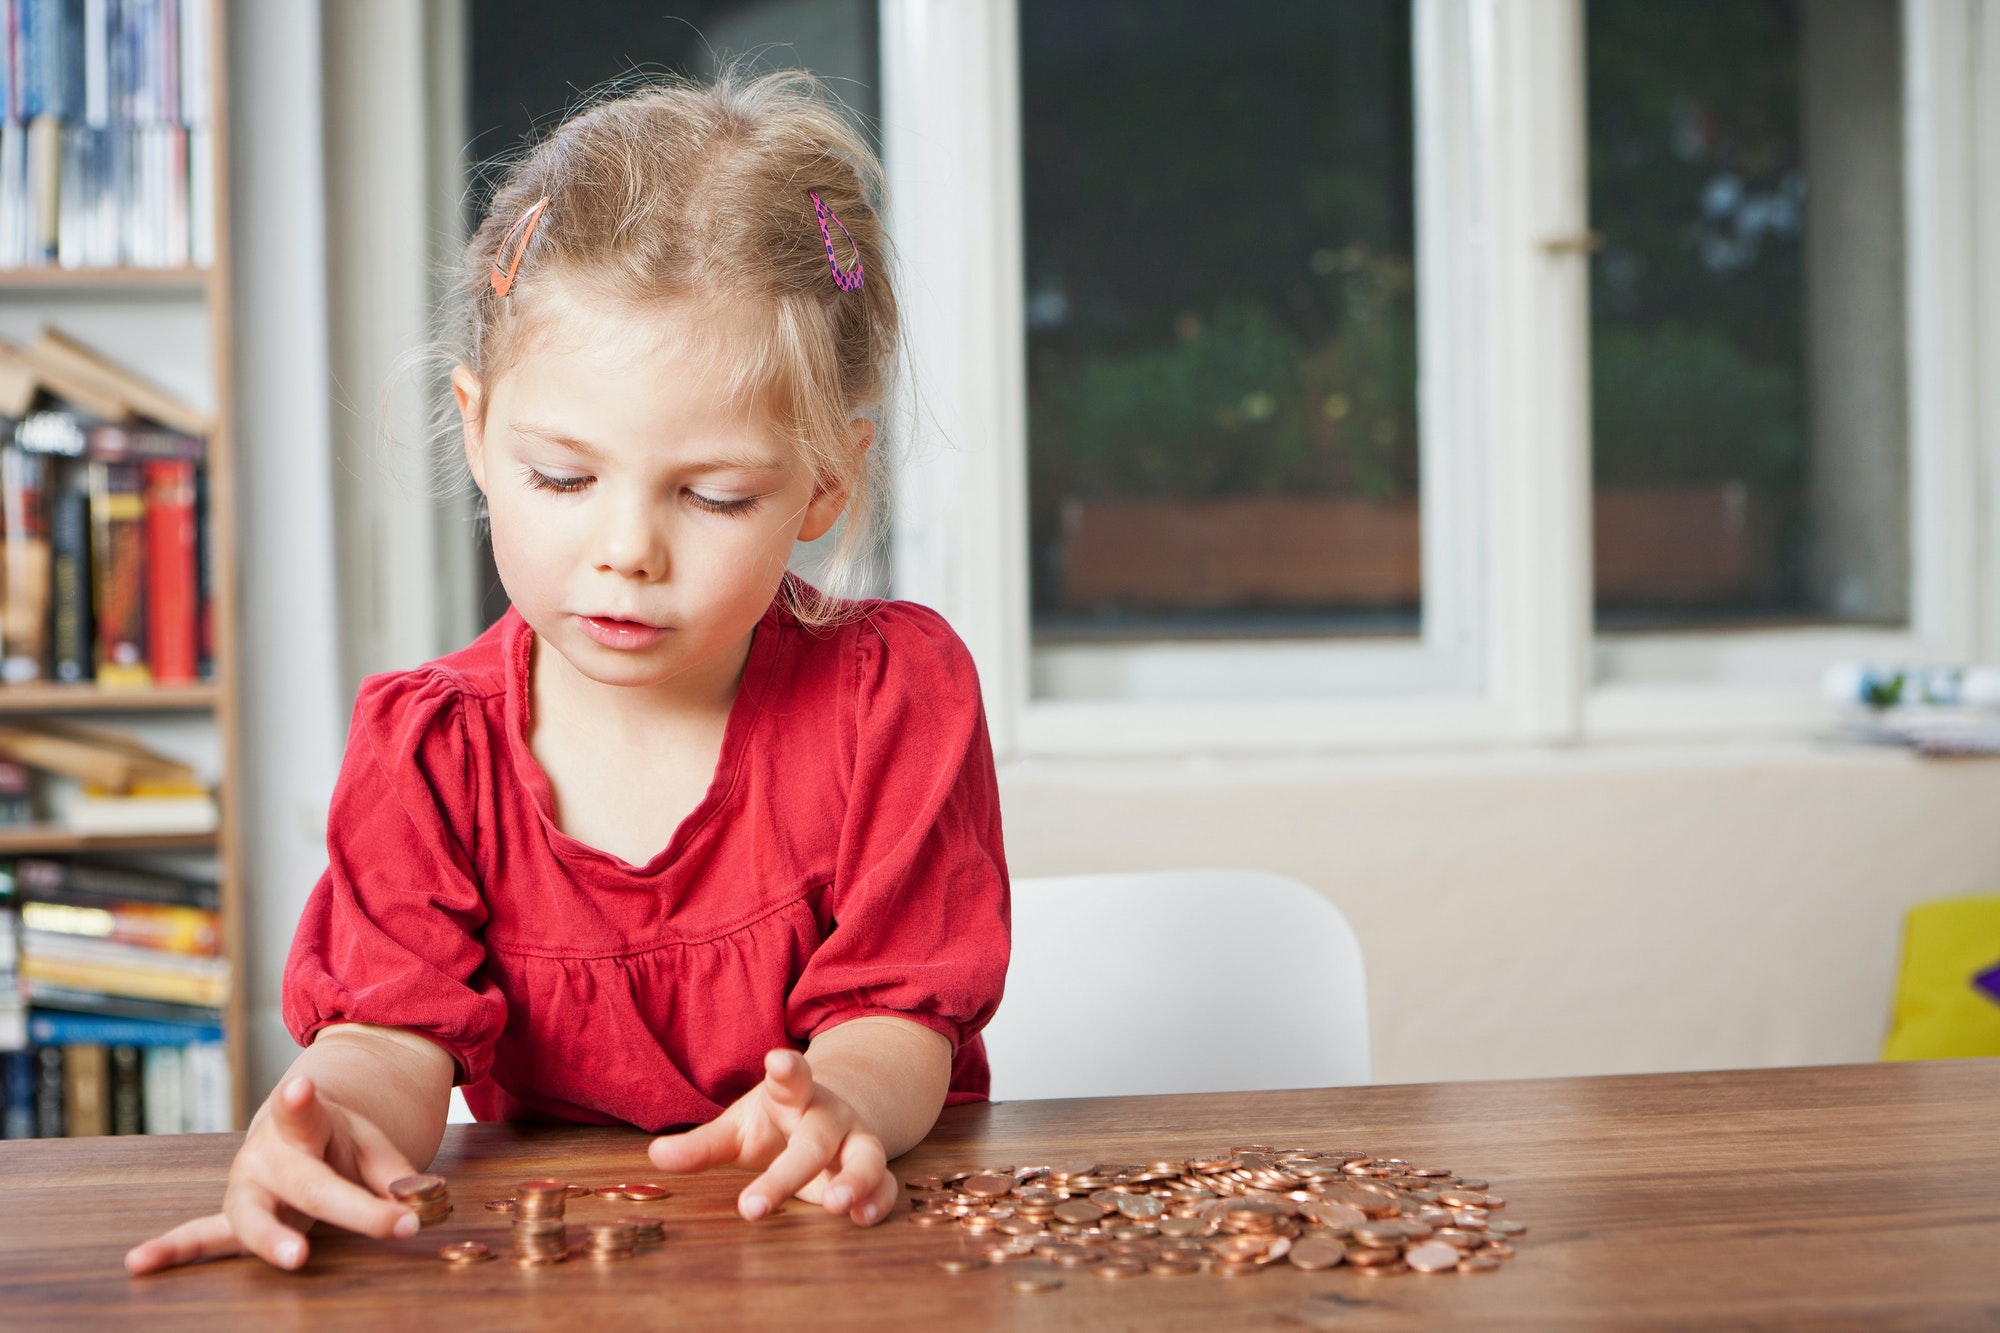 Girl playing with pennies at table